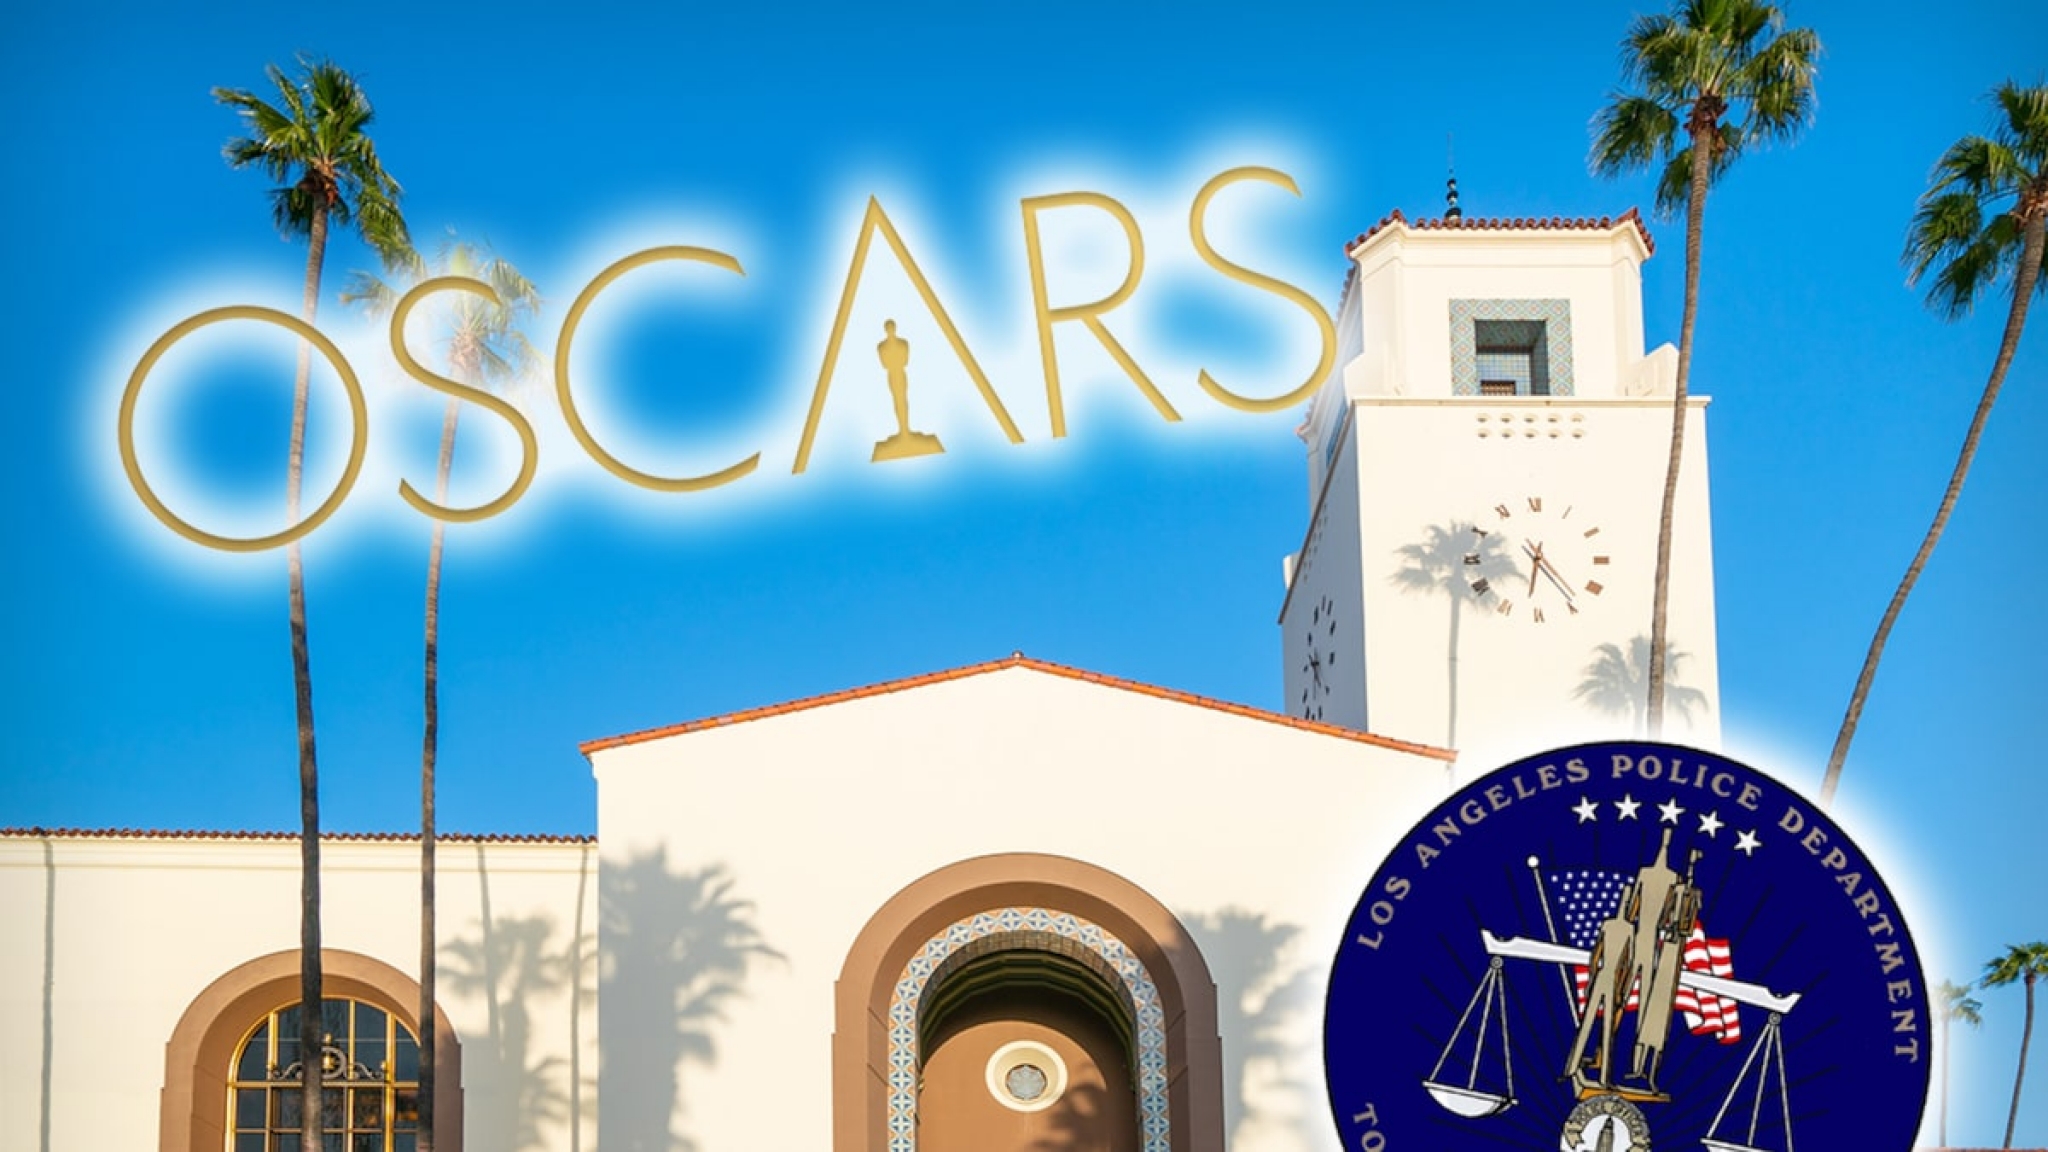 Oscars’ L.A. Train Station Location Sees Crew Members Getting Mugged